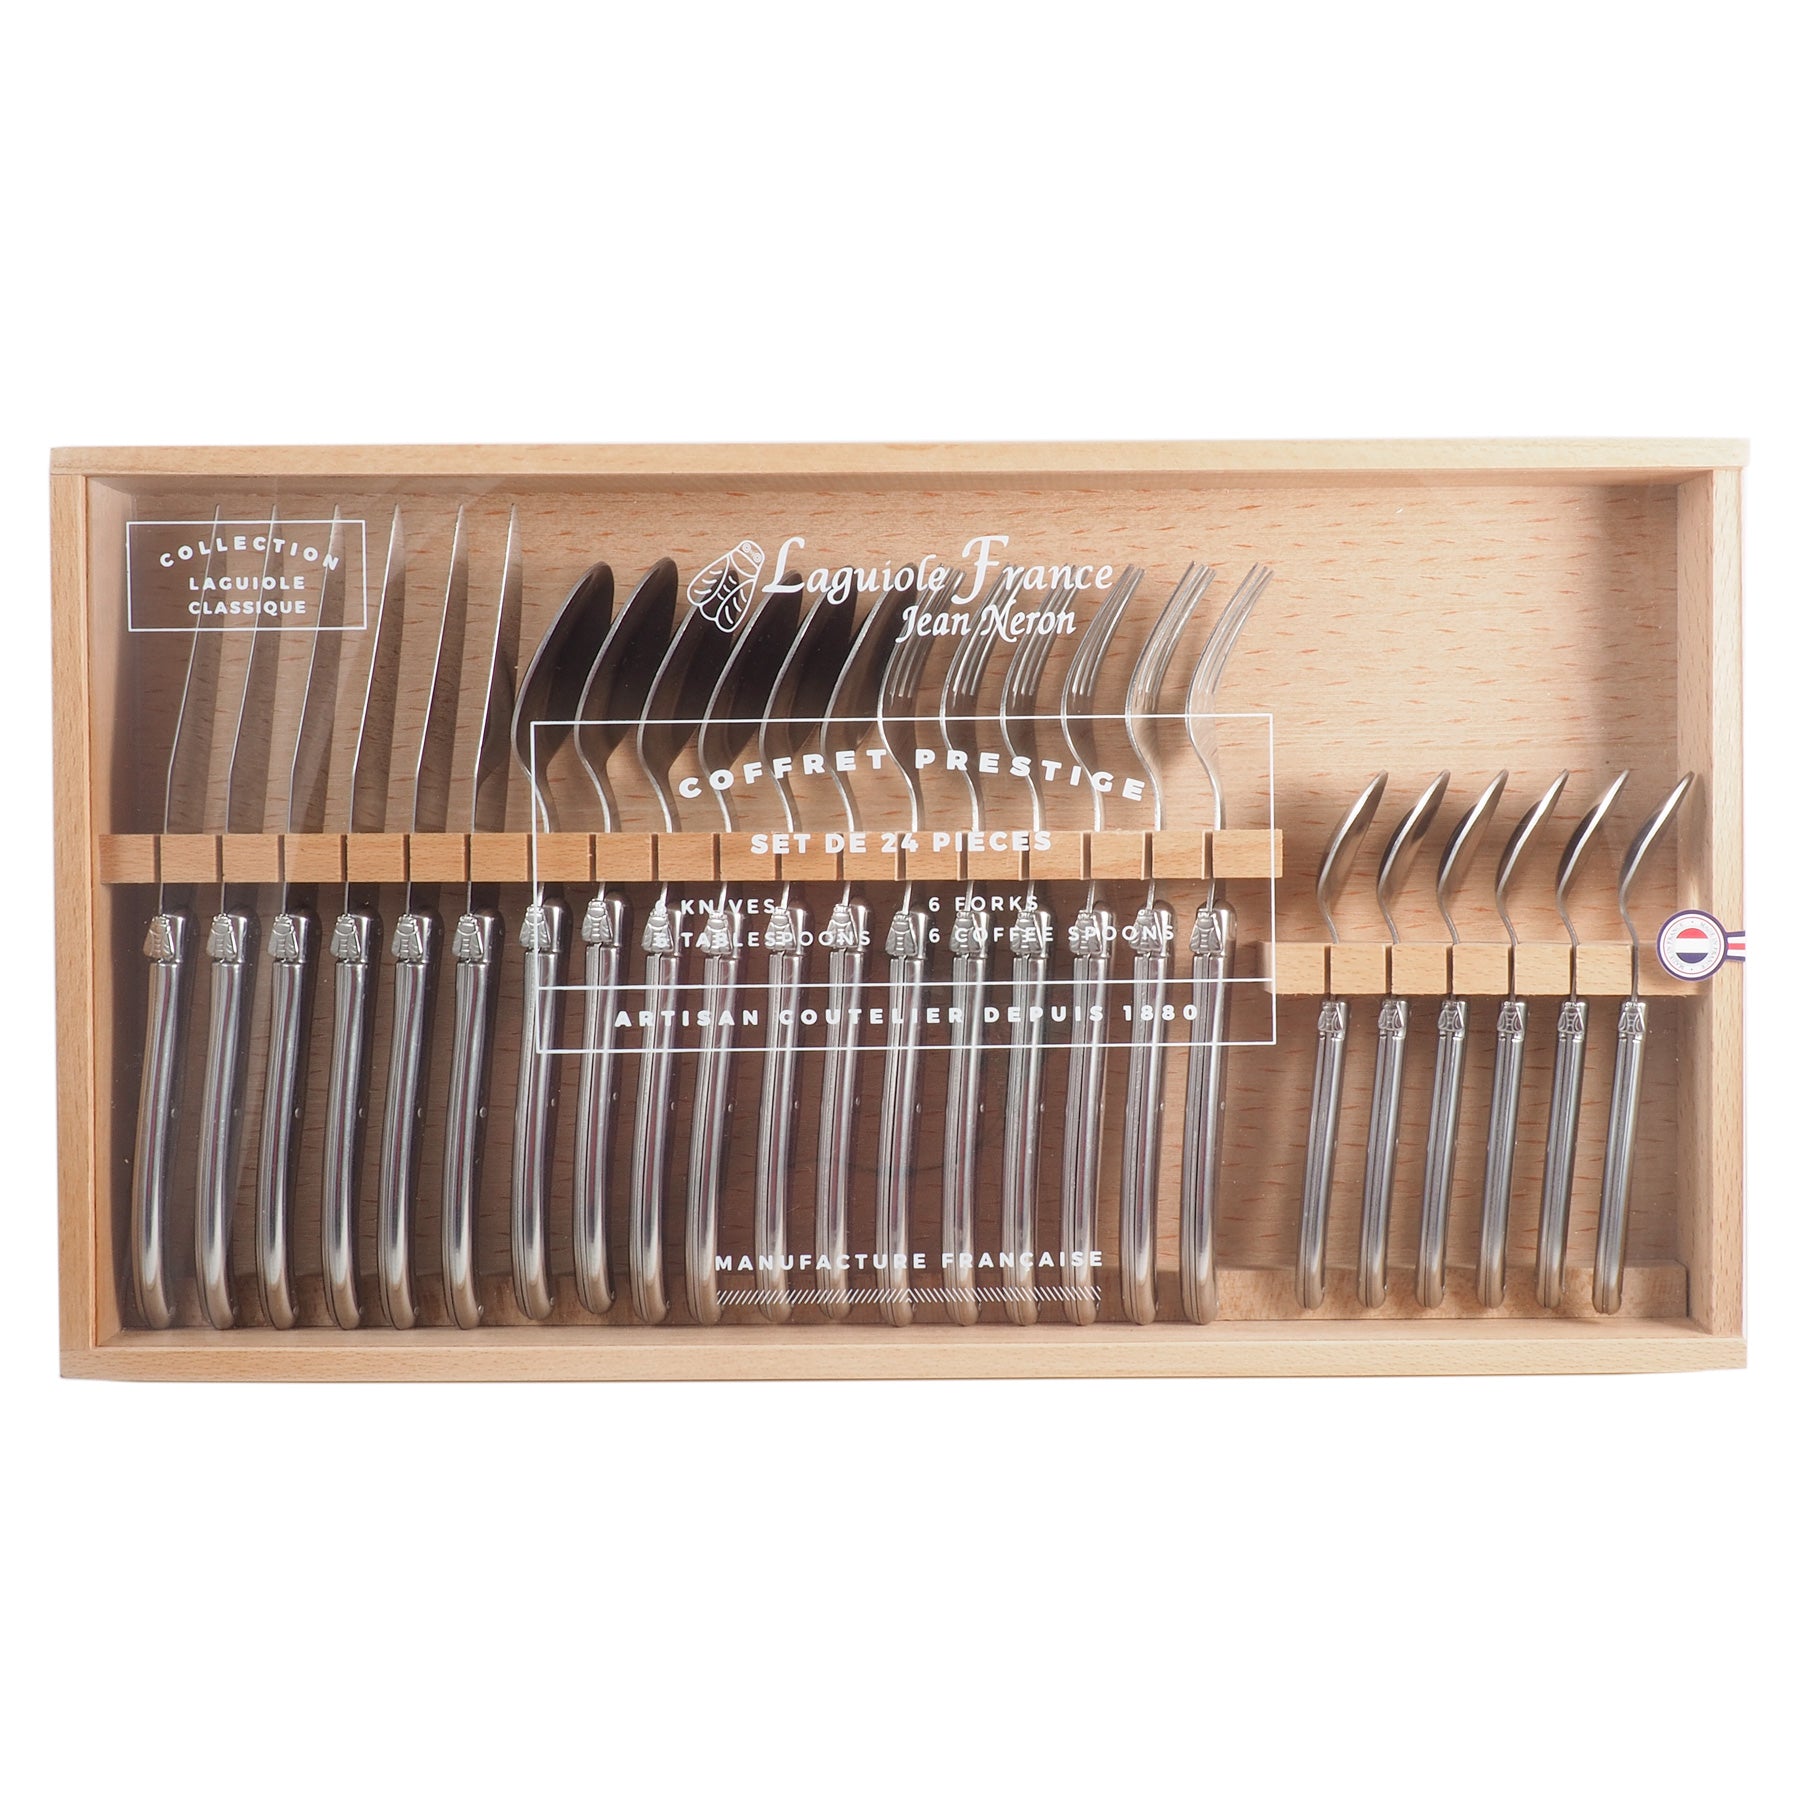 Laguiole Stainless Steel Flatware in Wooden Box with Acrylic Lid (Set of 24) Cutlery Set Laguiole Brand_Laguiole Flatware Sets Kitchen_Dinnerware Laguiole 7900-54000_SS_AL_Laguiole-Stainless-Steel-Set-of-24-Flatware